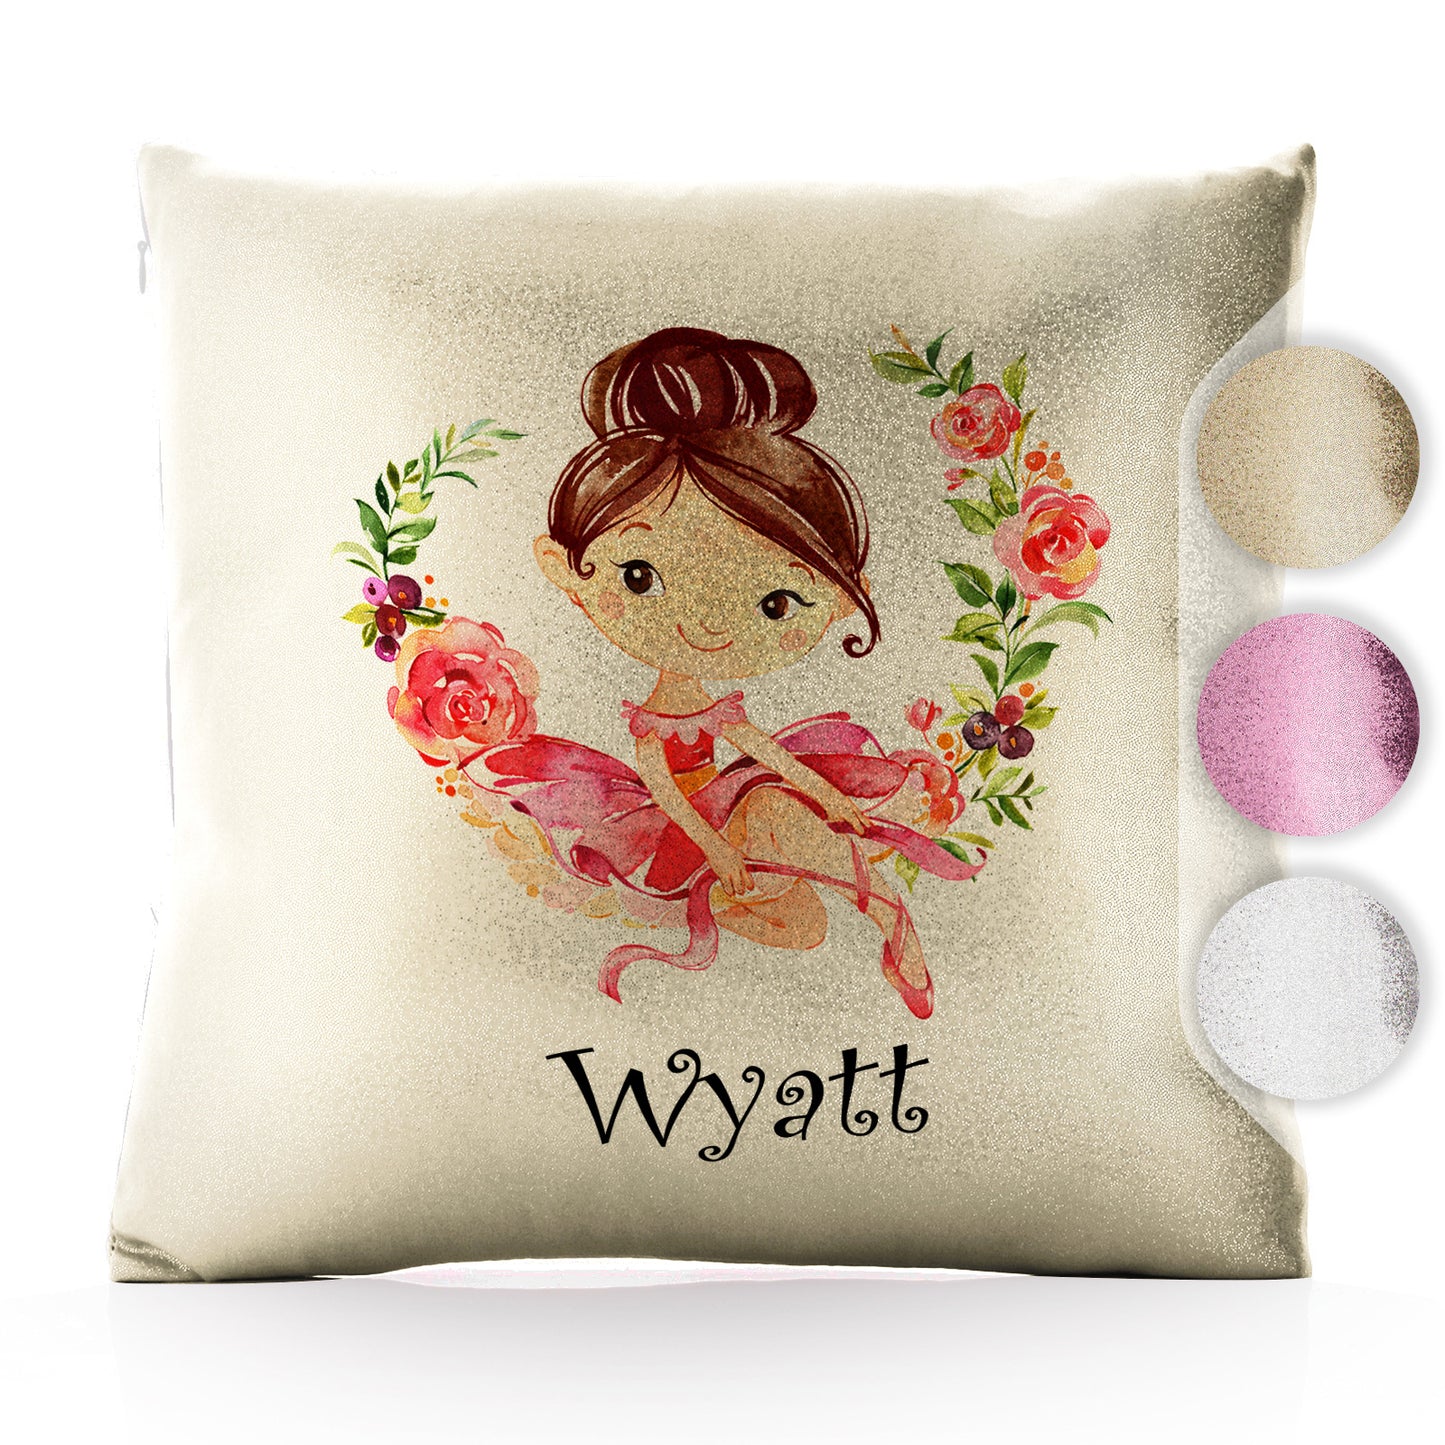 Personalised Glitter Cushion with Cute Text and Flower Wreath Light Brown Hair Ballerina